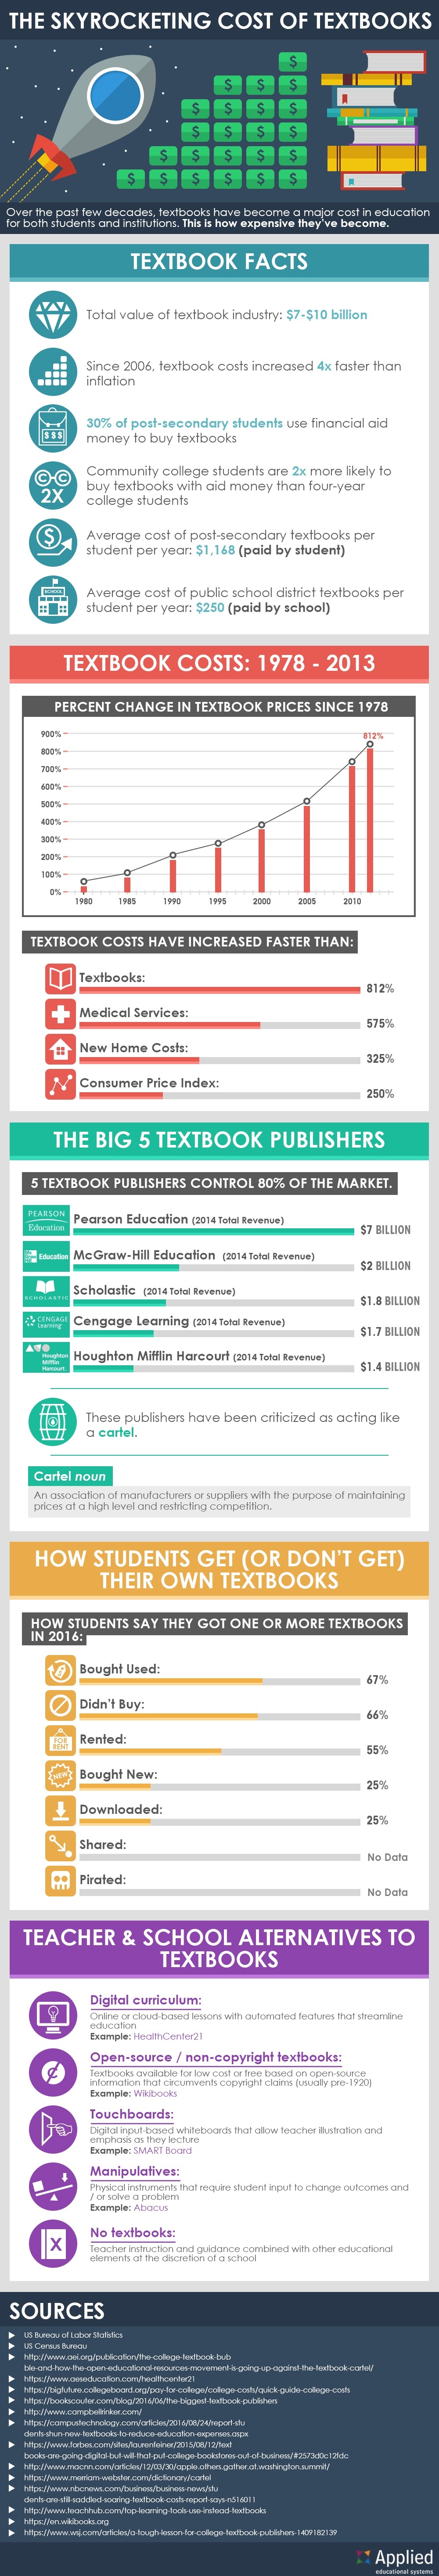 infographic-skyrocketing-cost-of-textbooks